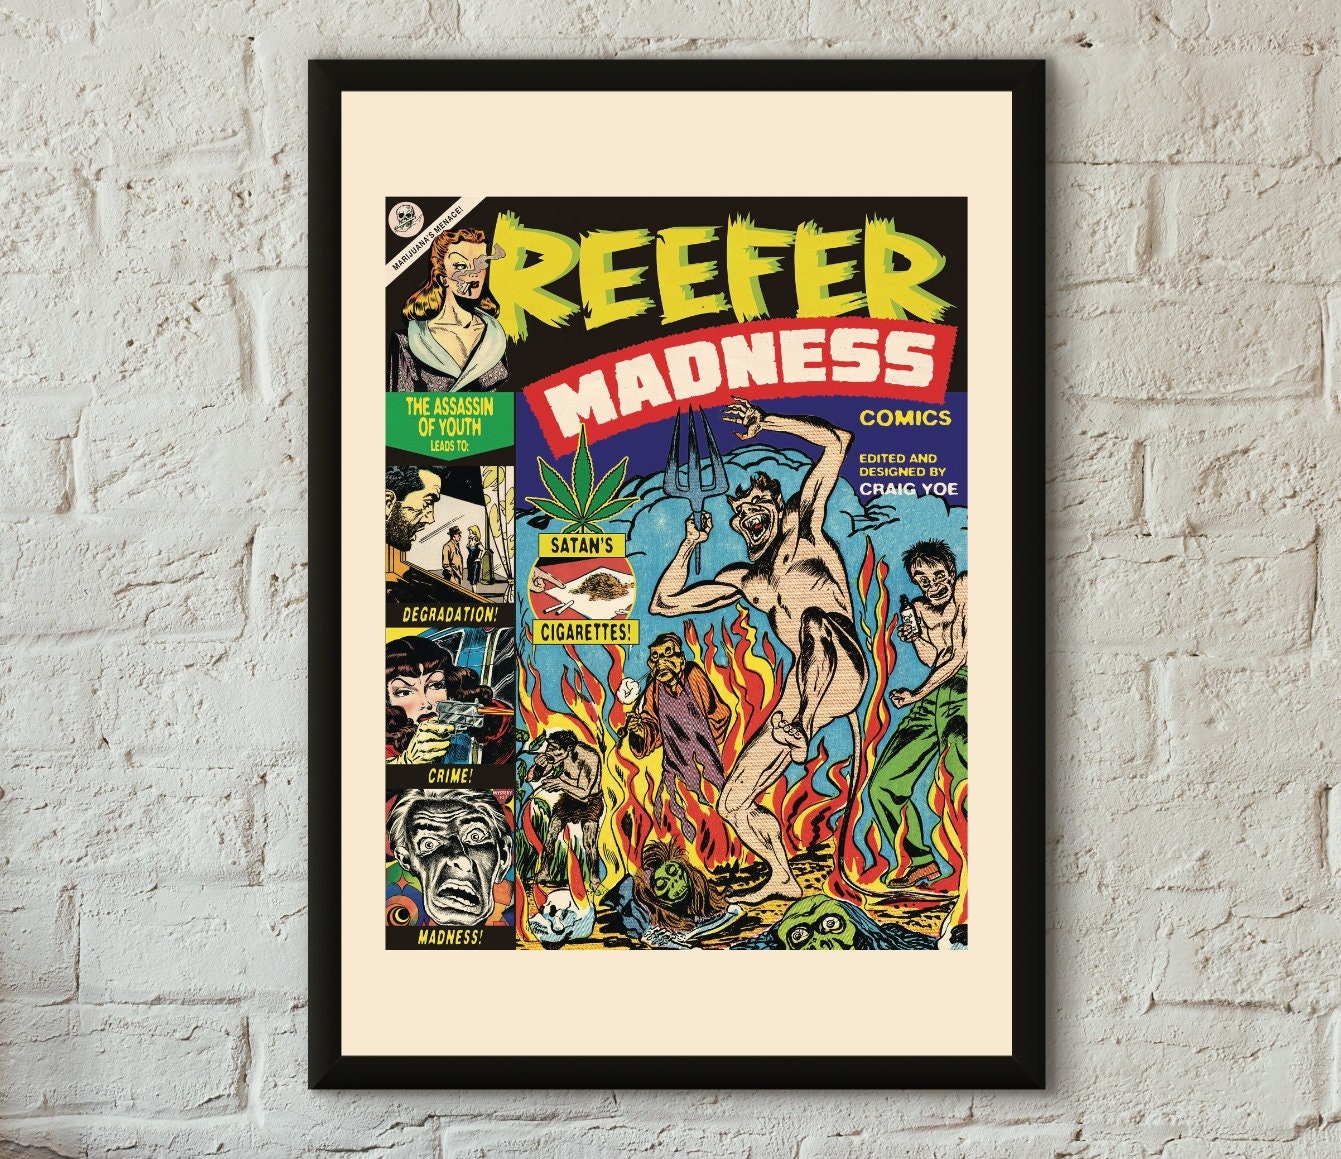 SIGNED madness 18x12 Poster 